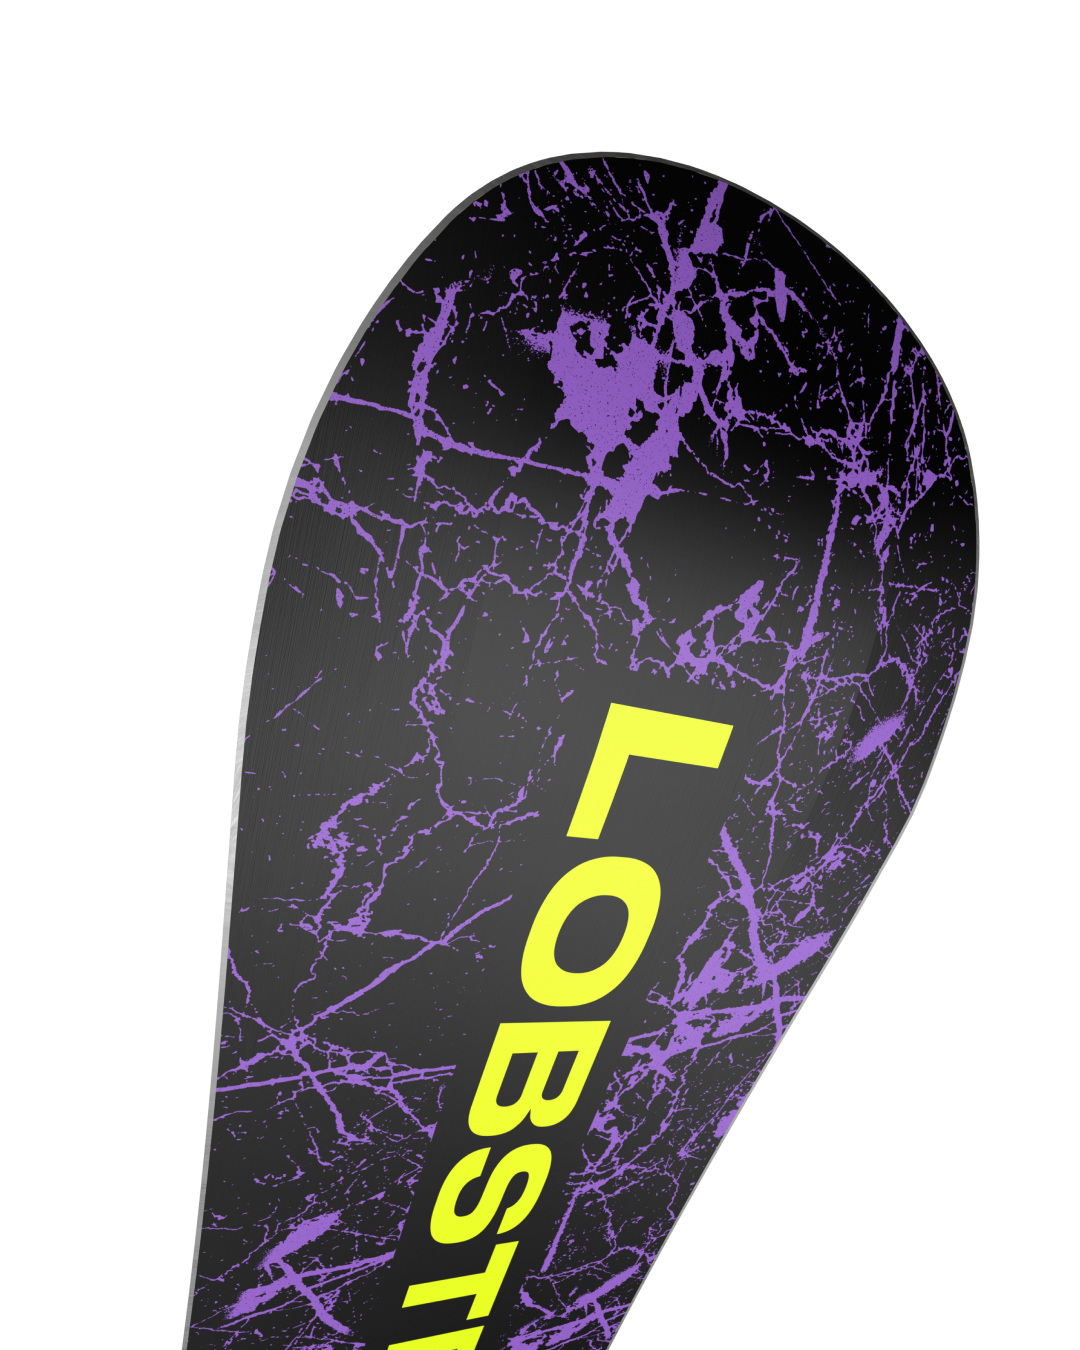 Airmaster lobstersnowboards 2023-2024 snowboarding product image